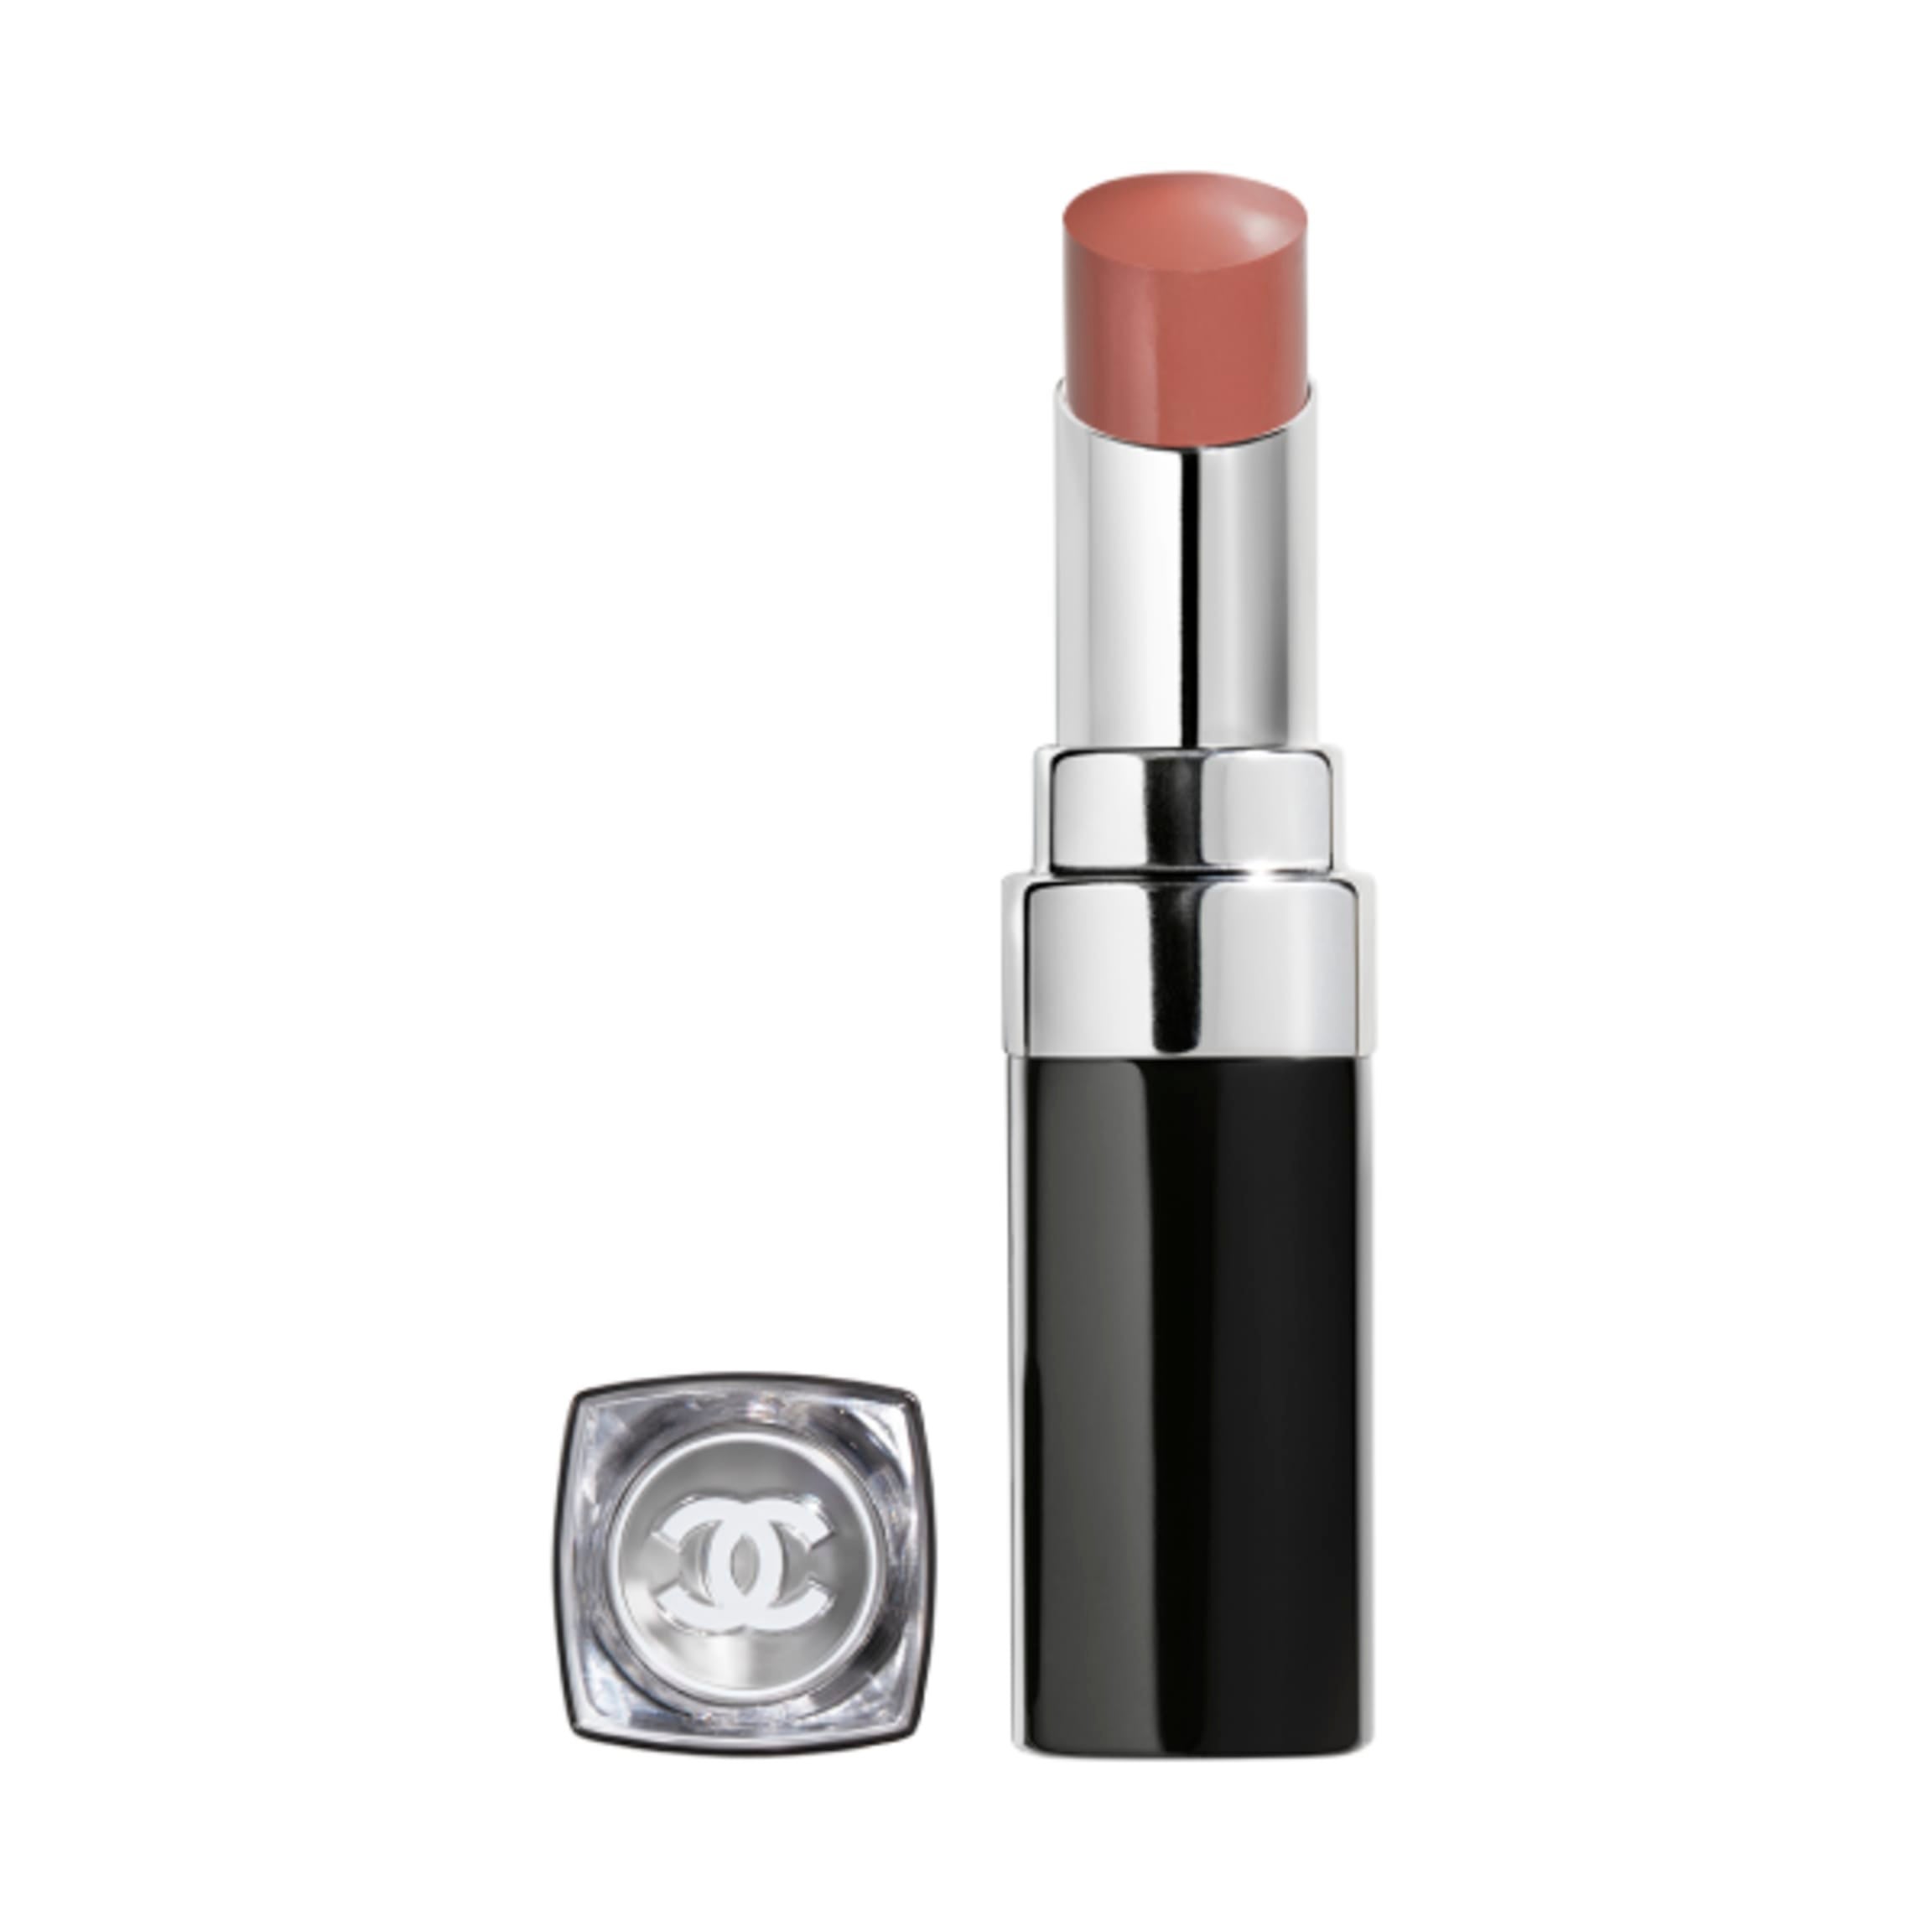 CHANEL ROUGE COCO BLOOM SWATCHES #SHORTS Vitale Alive Sunlight Season  Radiant Unexpected Surprise 